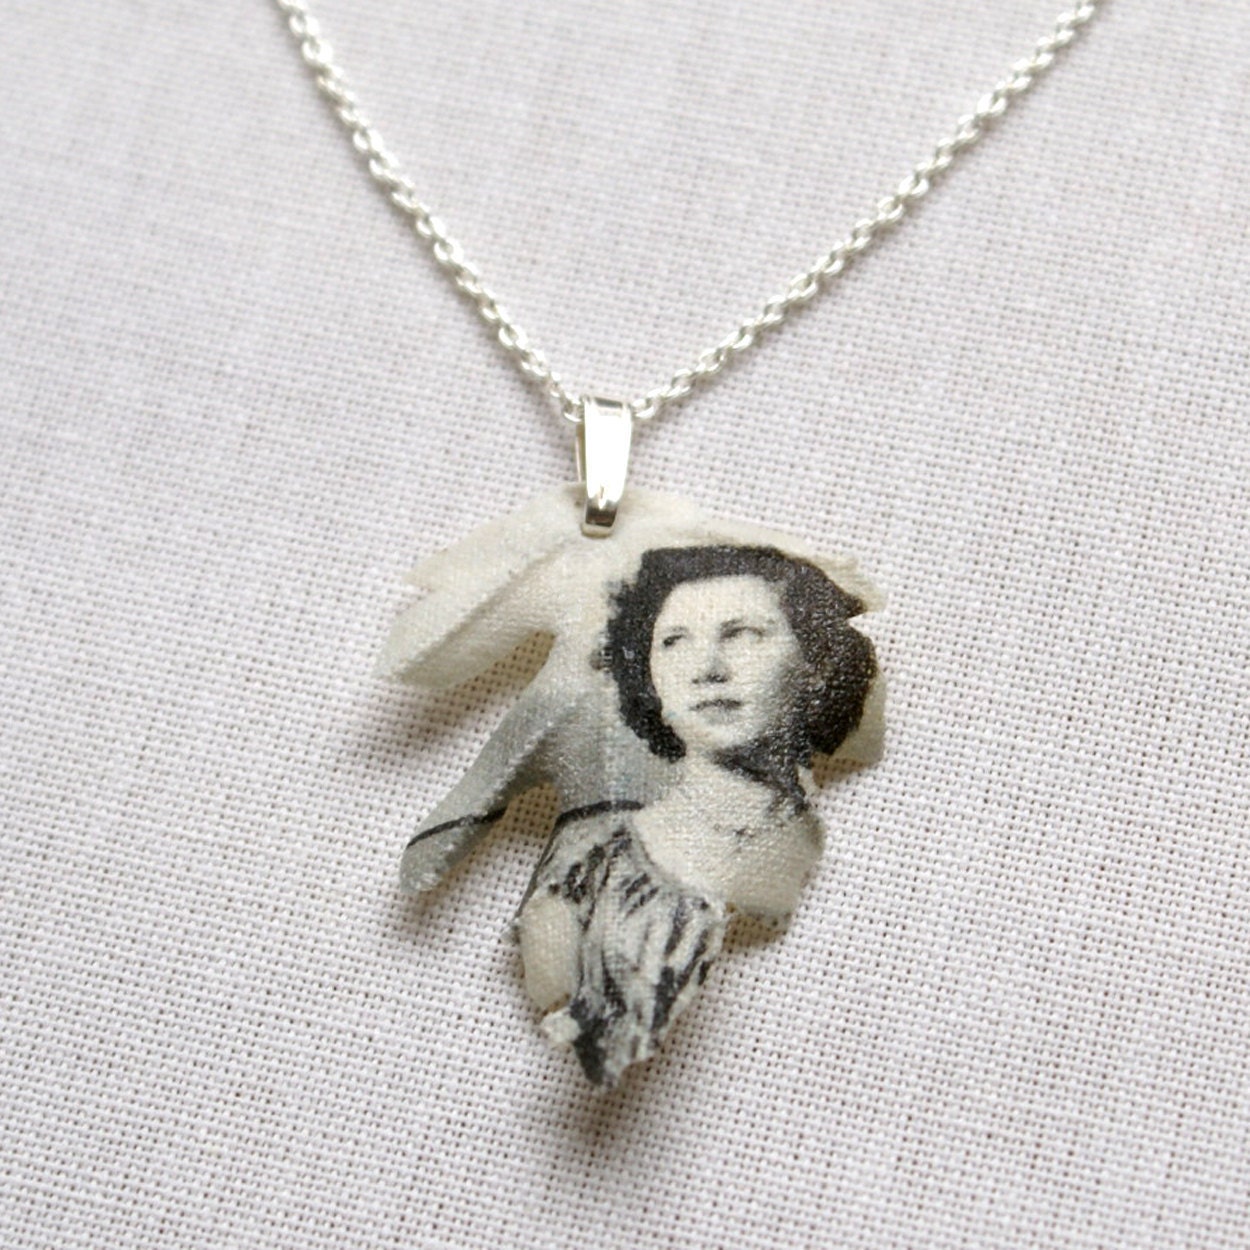 Custom made silver necklace with Oak leaf pendant printed with your photograph